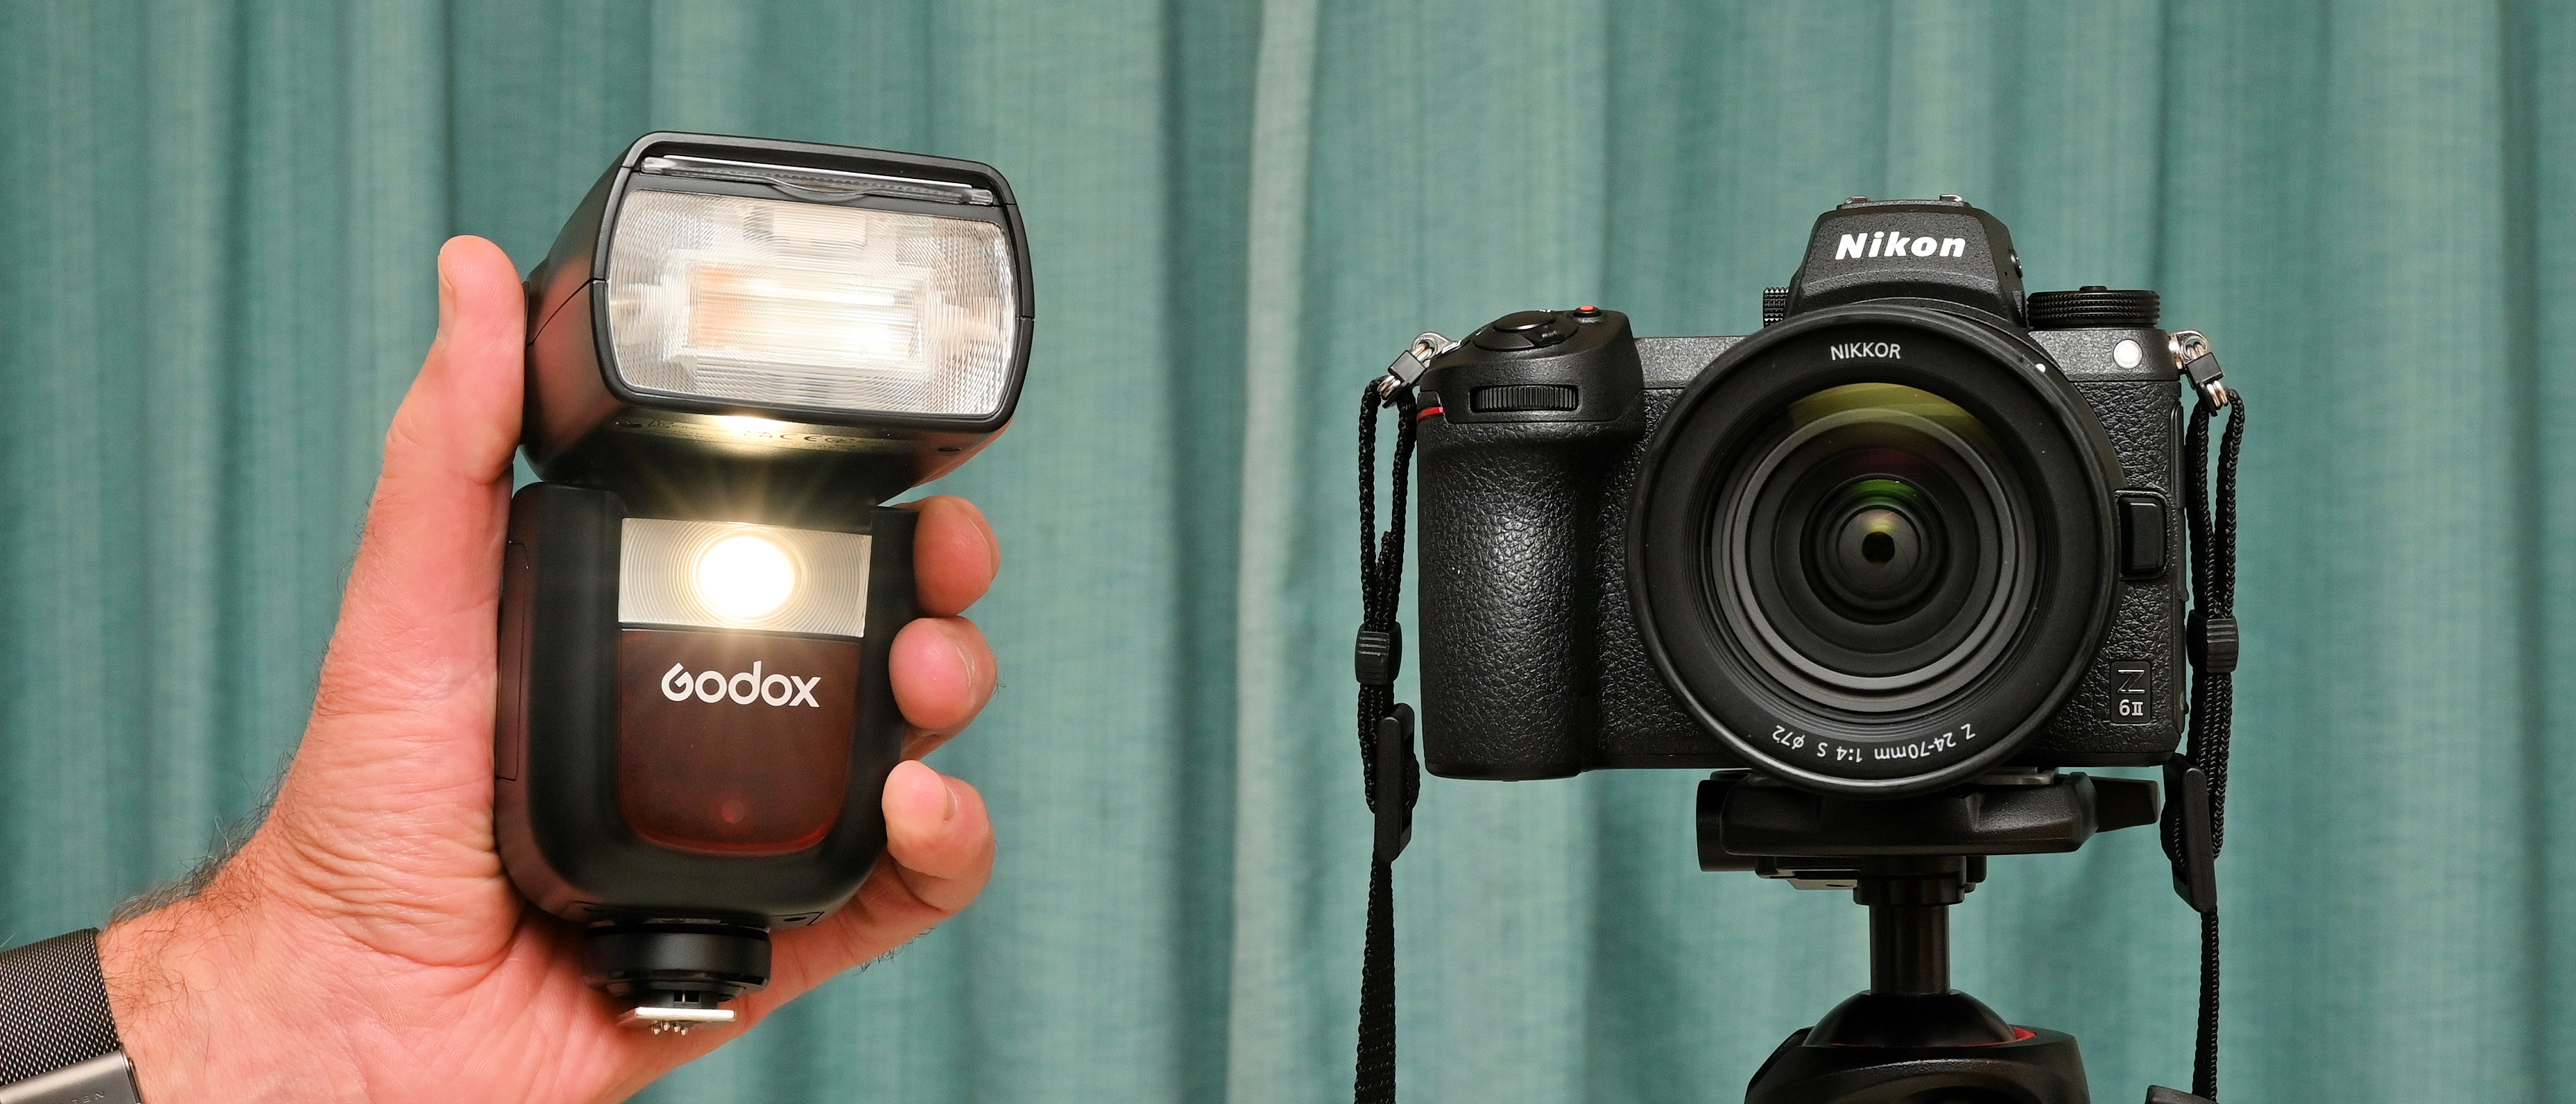 Is the Godox V860III the Best Value for Money Flash on the Market?